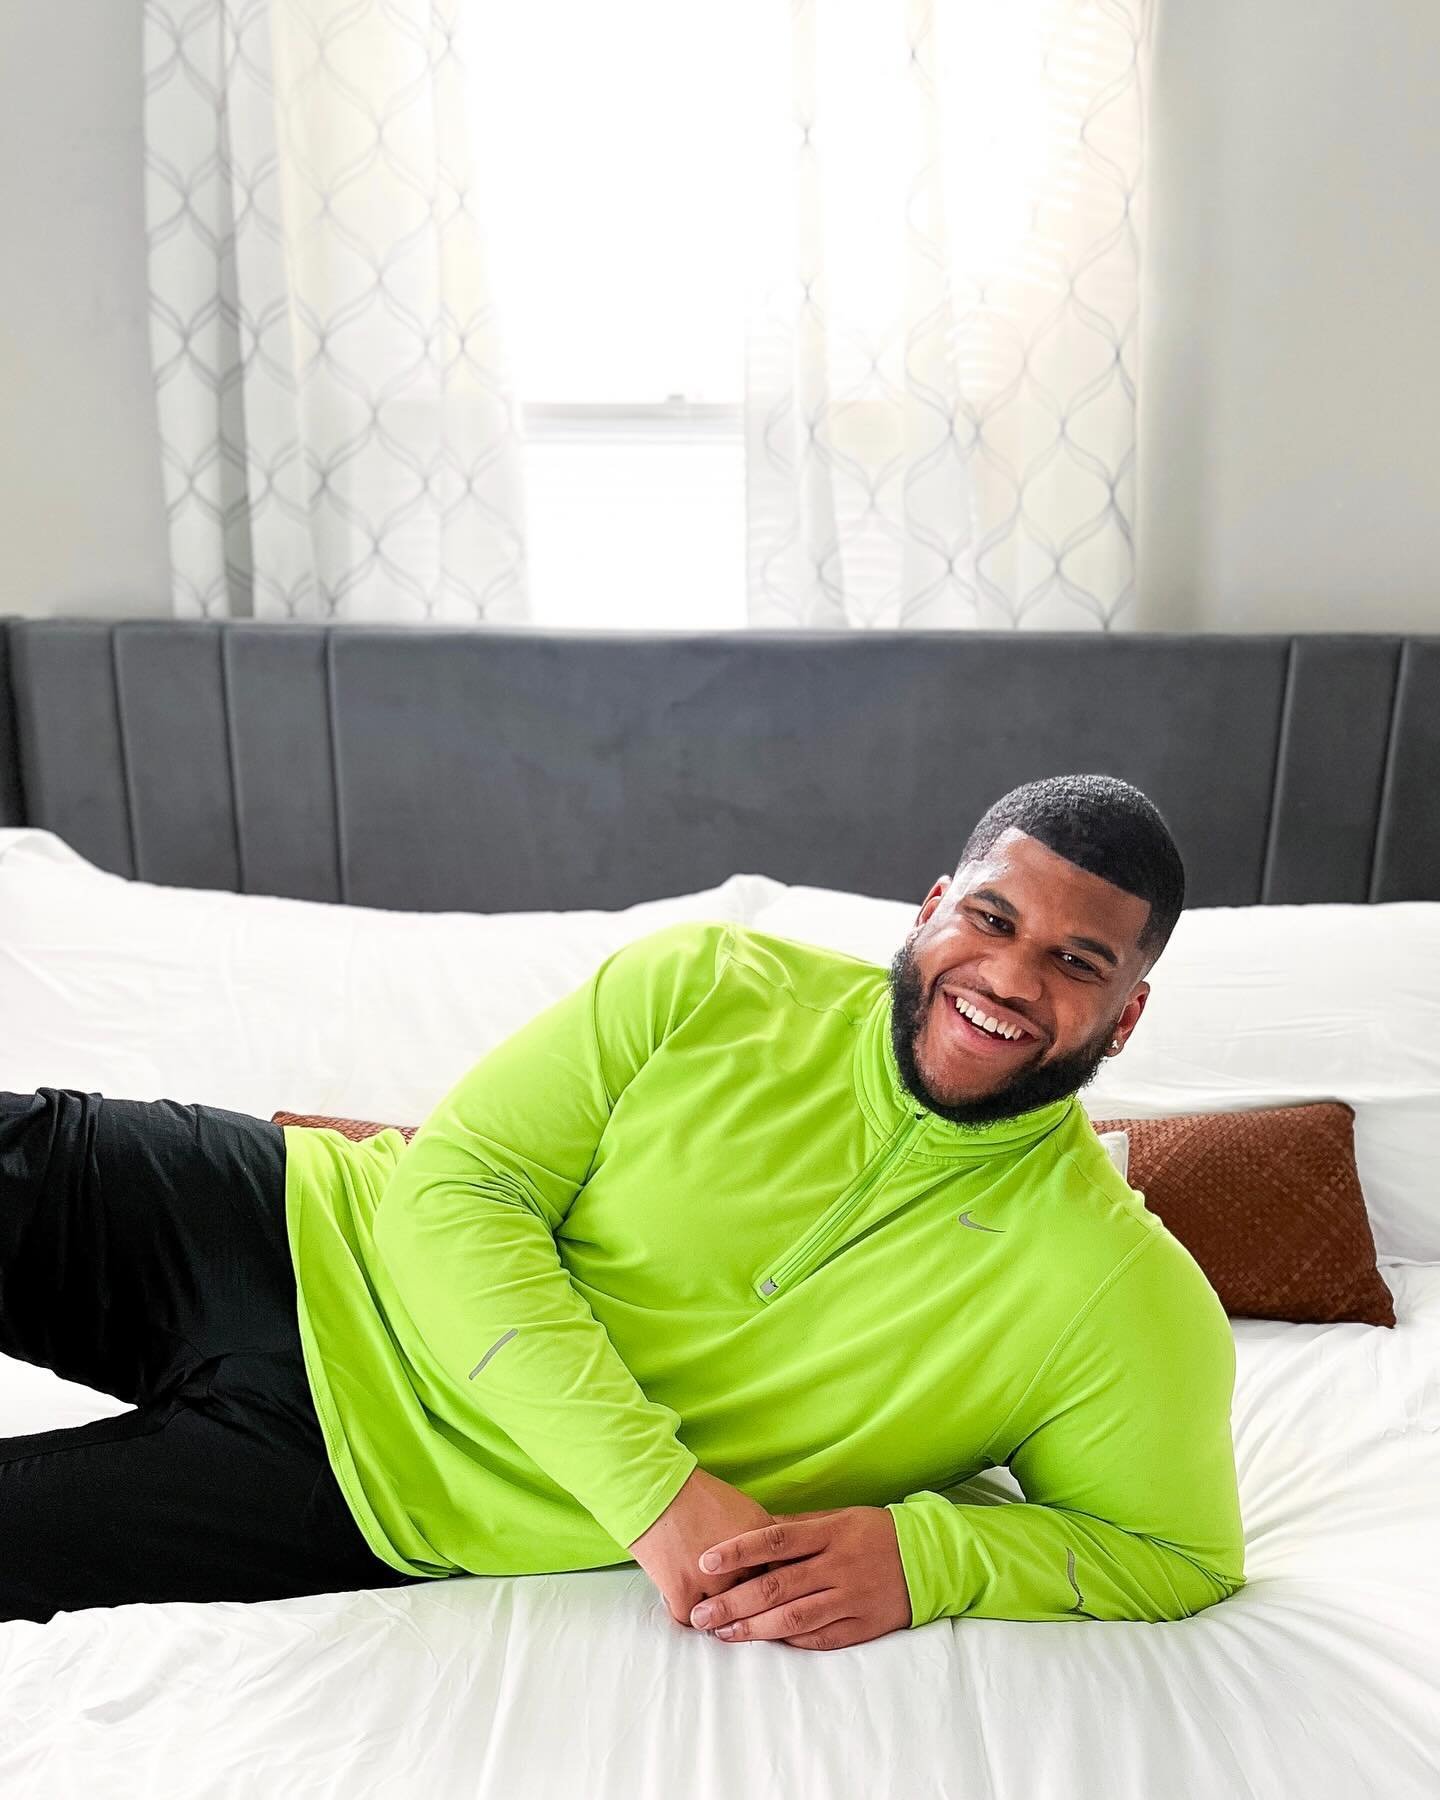 As my family is getting bigger, it&rsquo;s only right that my mattress should to! From its extreme comfort, to balance of firm and plush, I couldn&rsquo;t imagine choosing any other mattress! Shoutouts to @bigfigmattress . #BigFigPartner